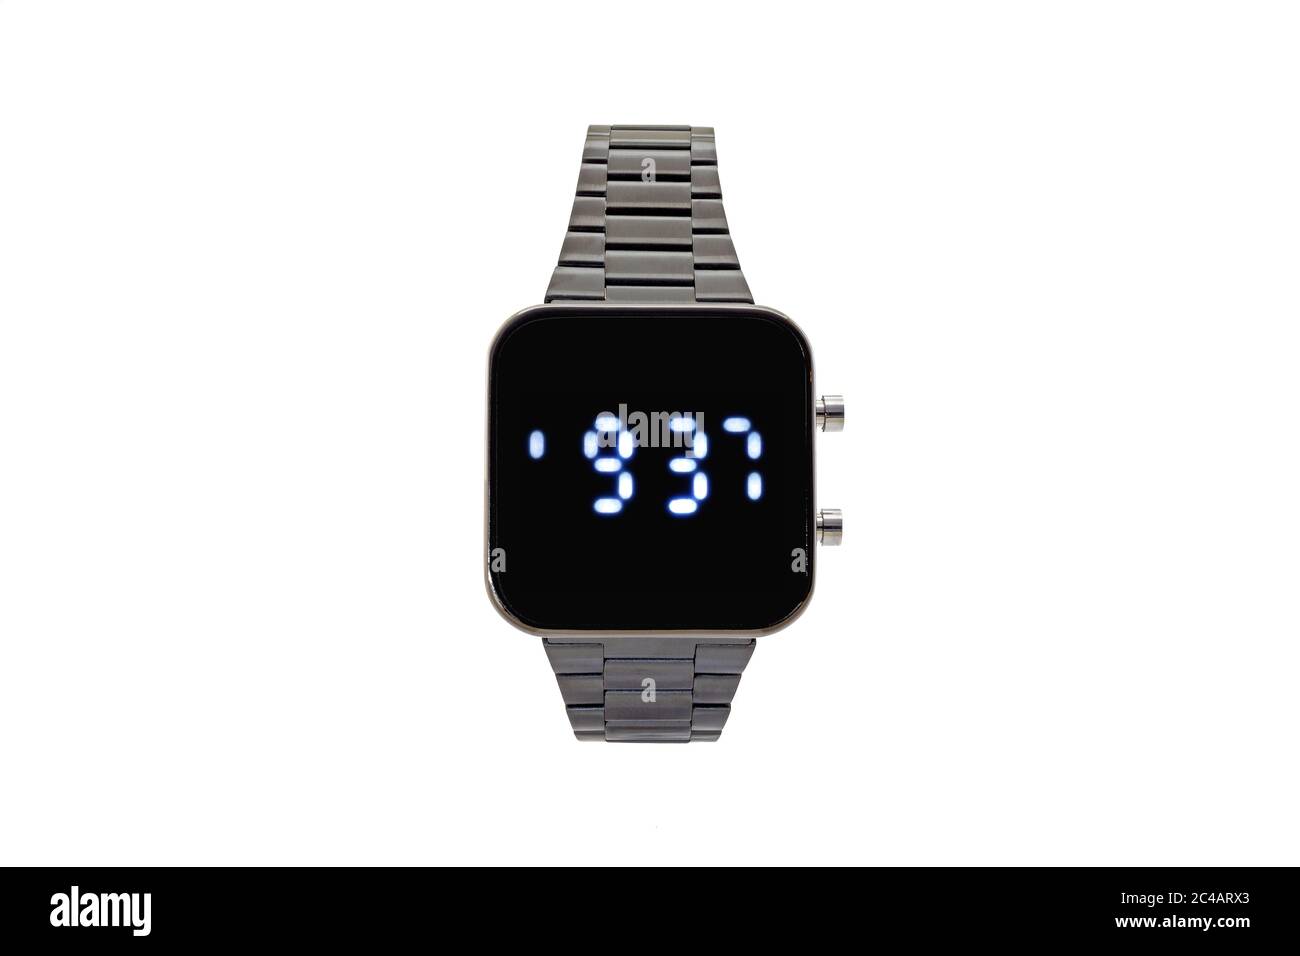 Square smartwatch with black metal bracelet, black dial face and digital numerals, isolated on white background. Stock Photo